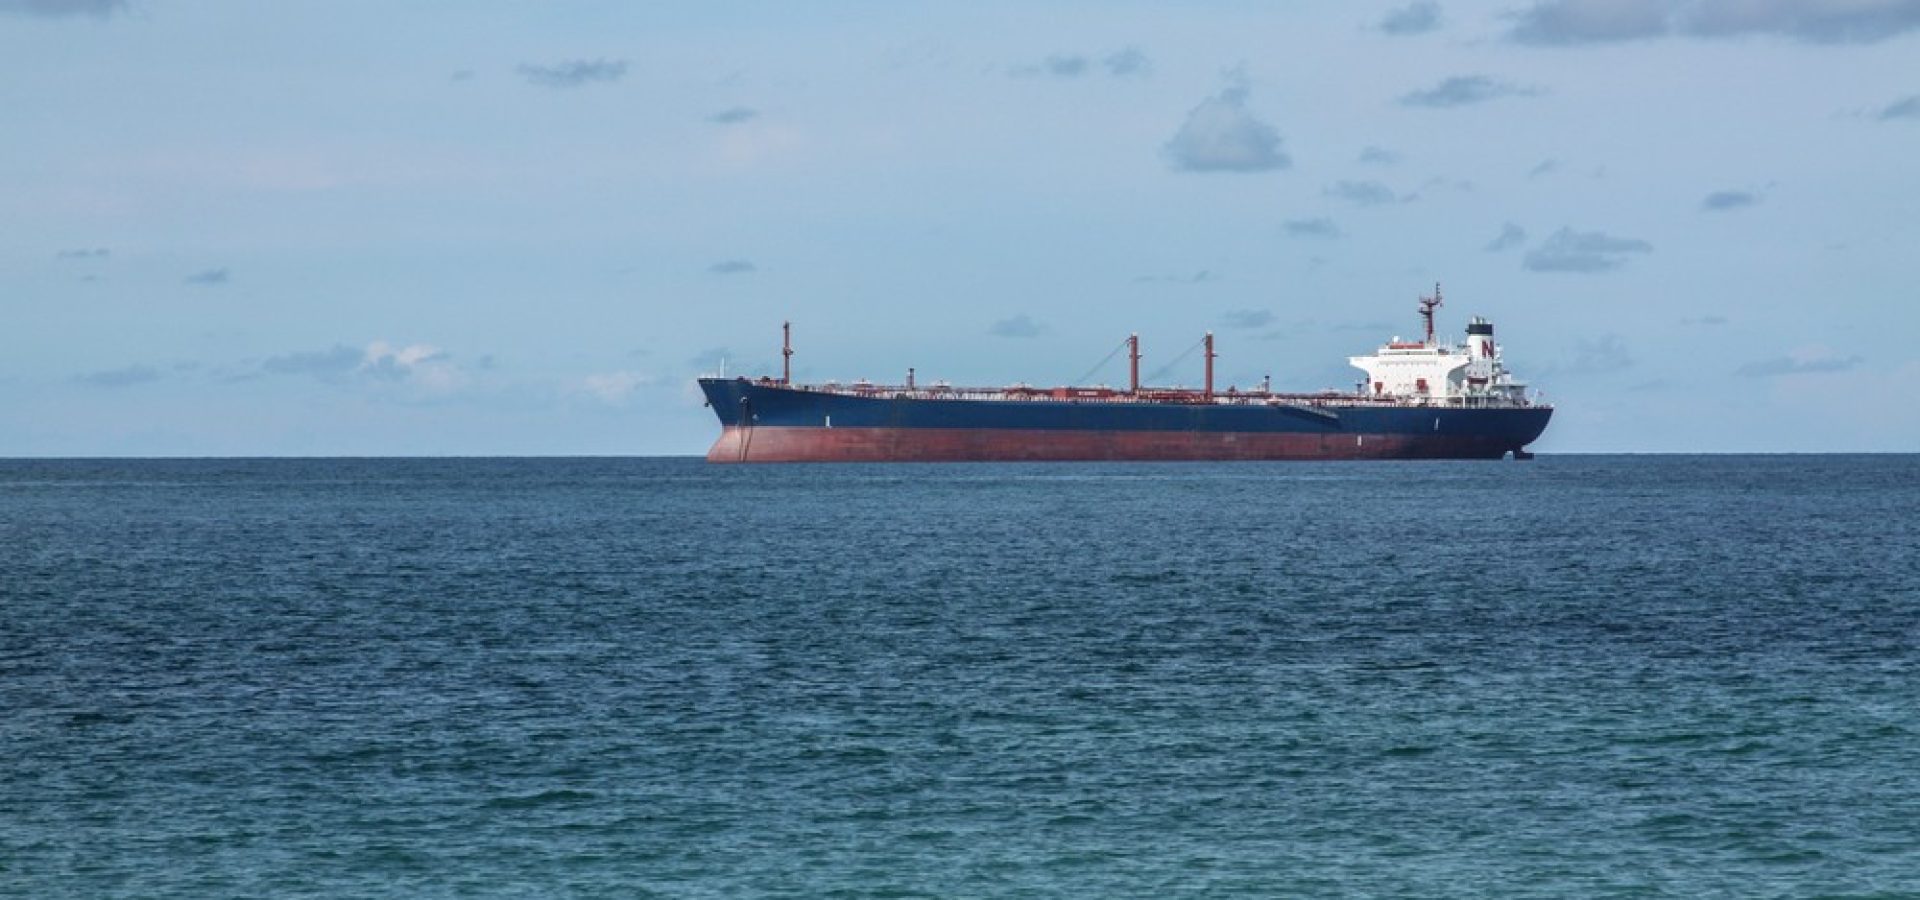 Wibest – Tanker Ship: A tanker ship in the middle of the sea.